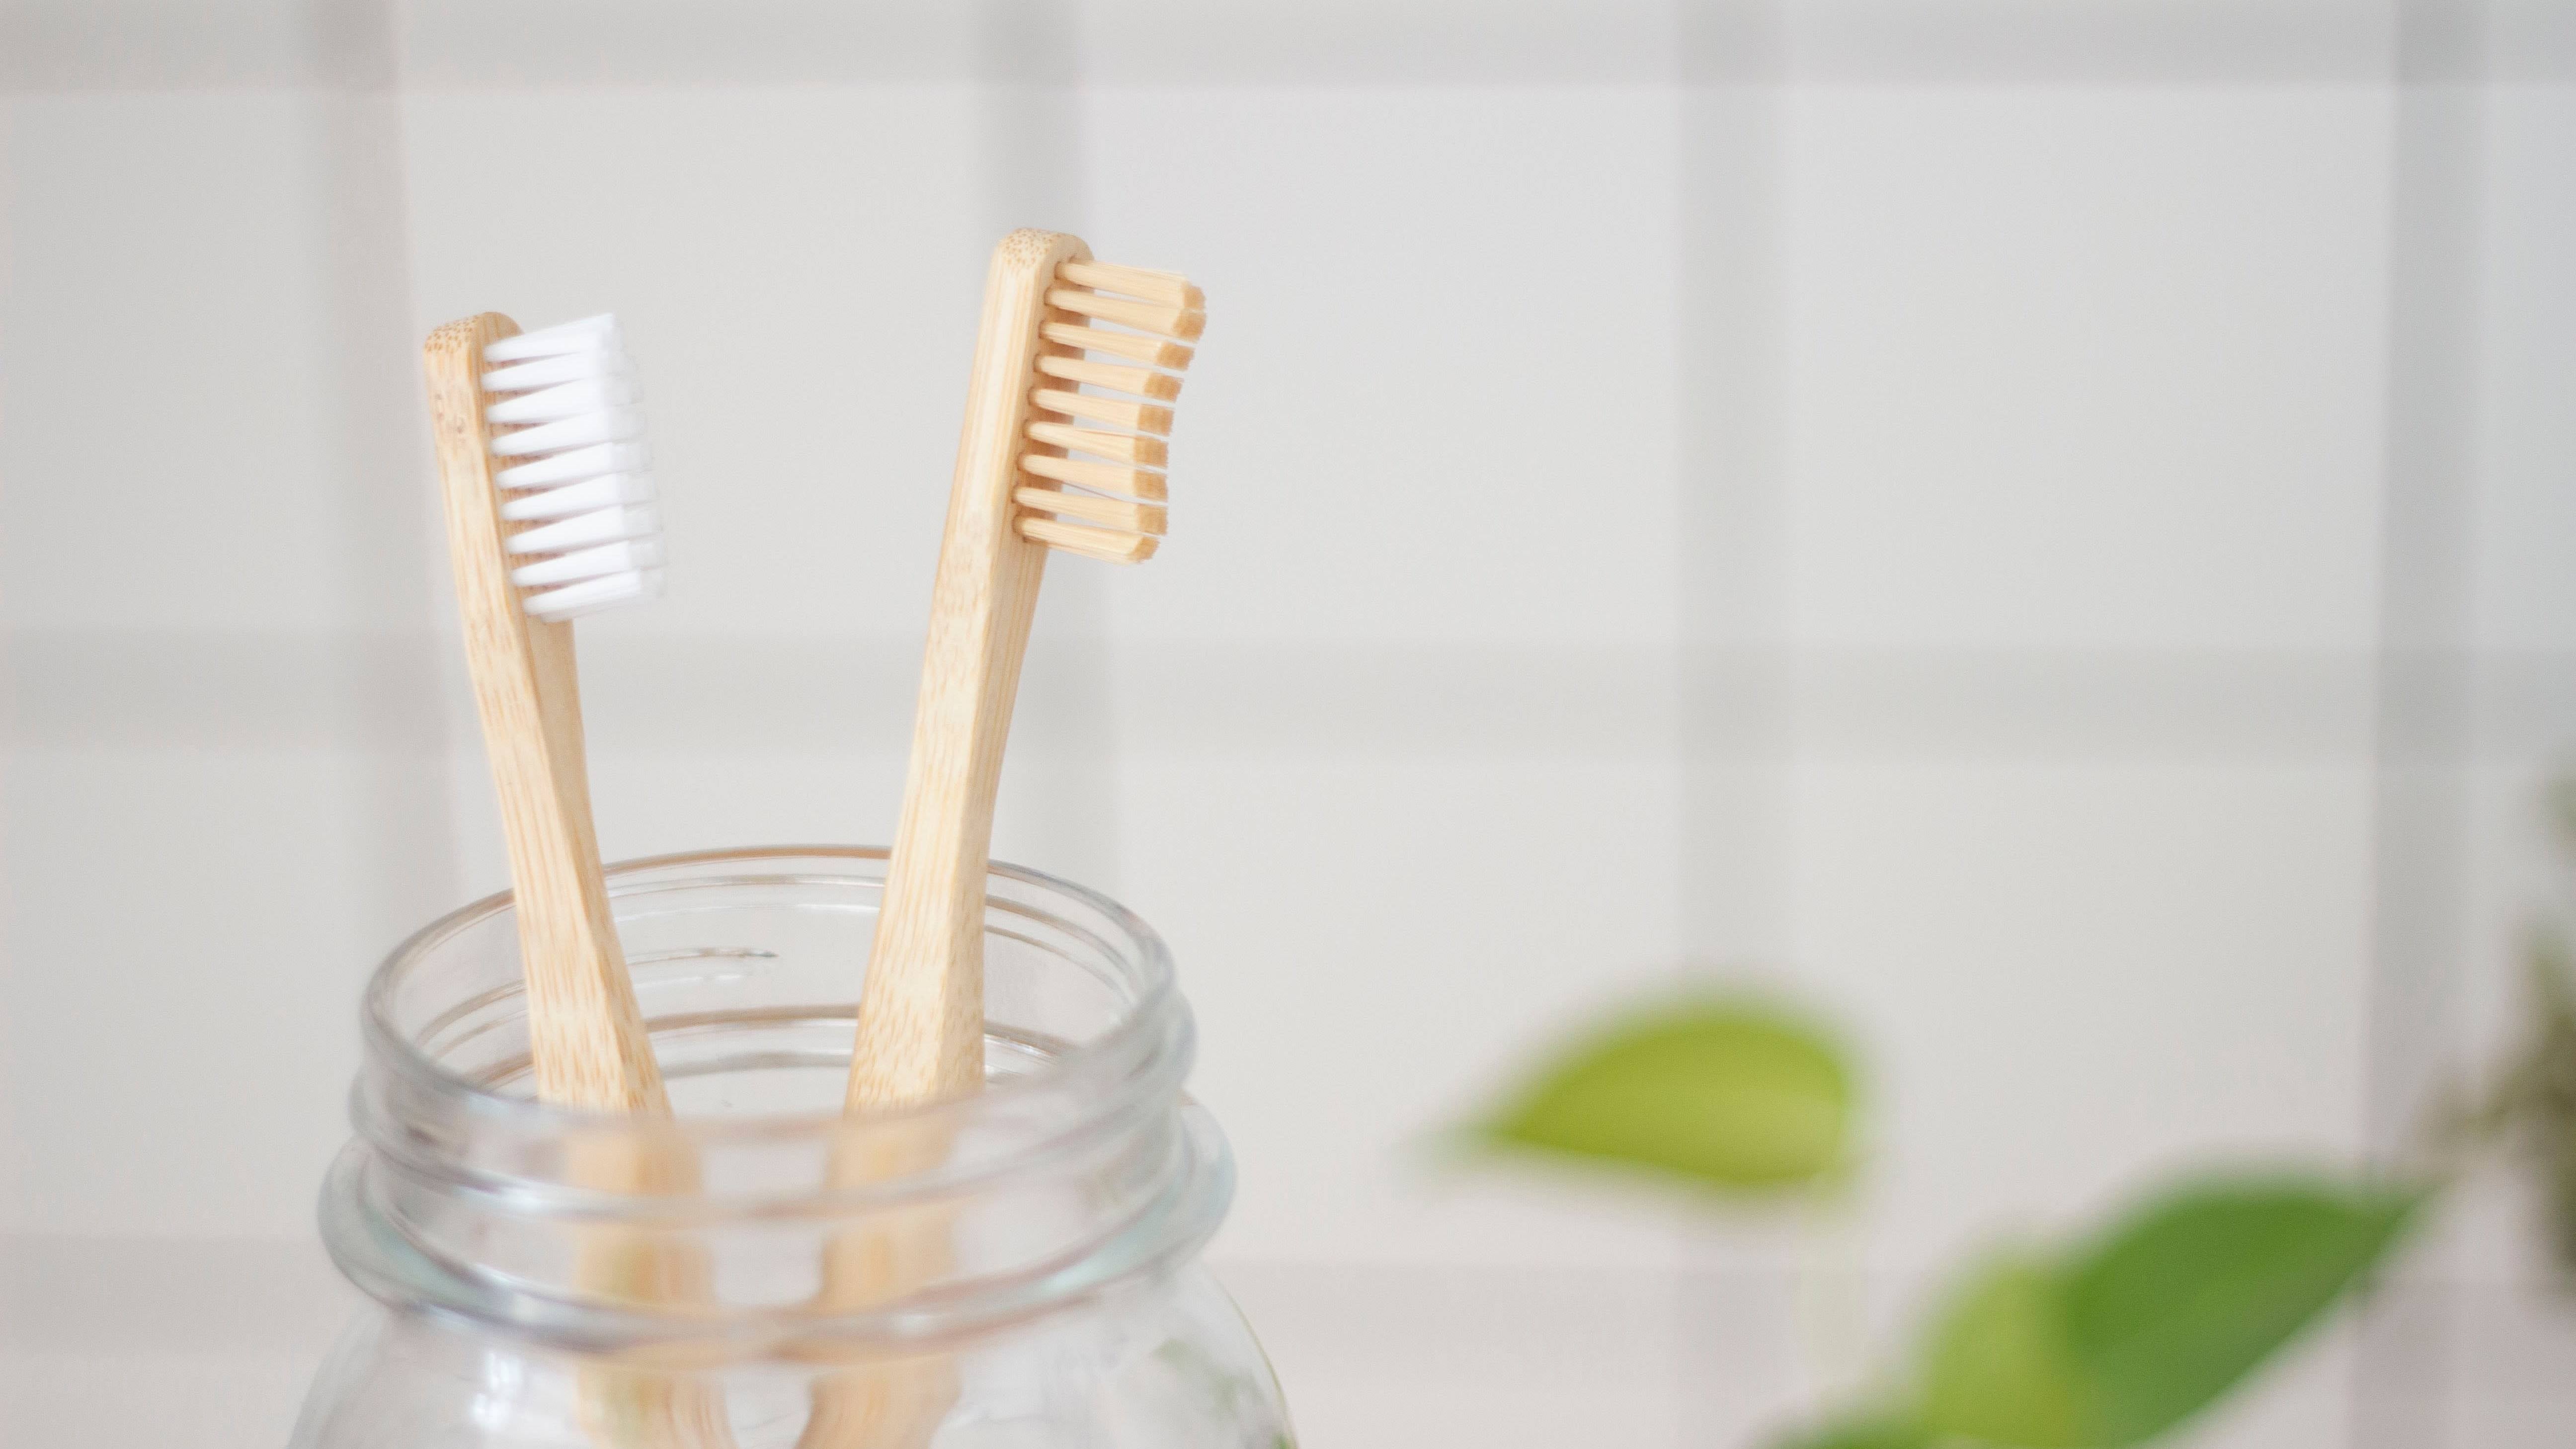 Keep Your Kids’ Bathroom Clean With A ‘When You Brush’ Chore Chart